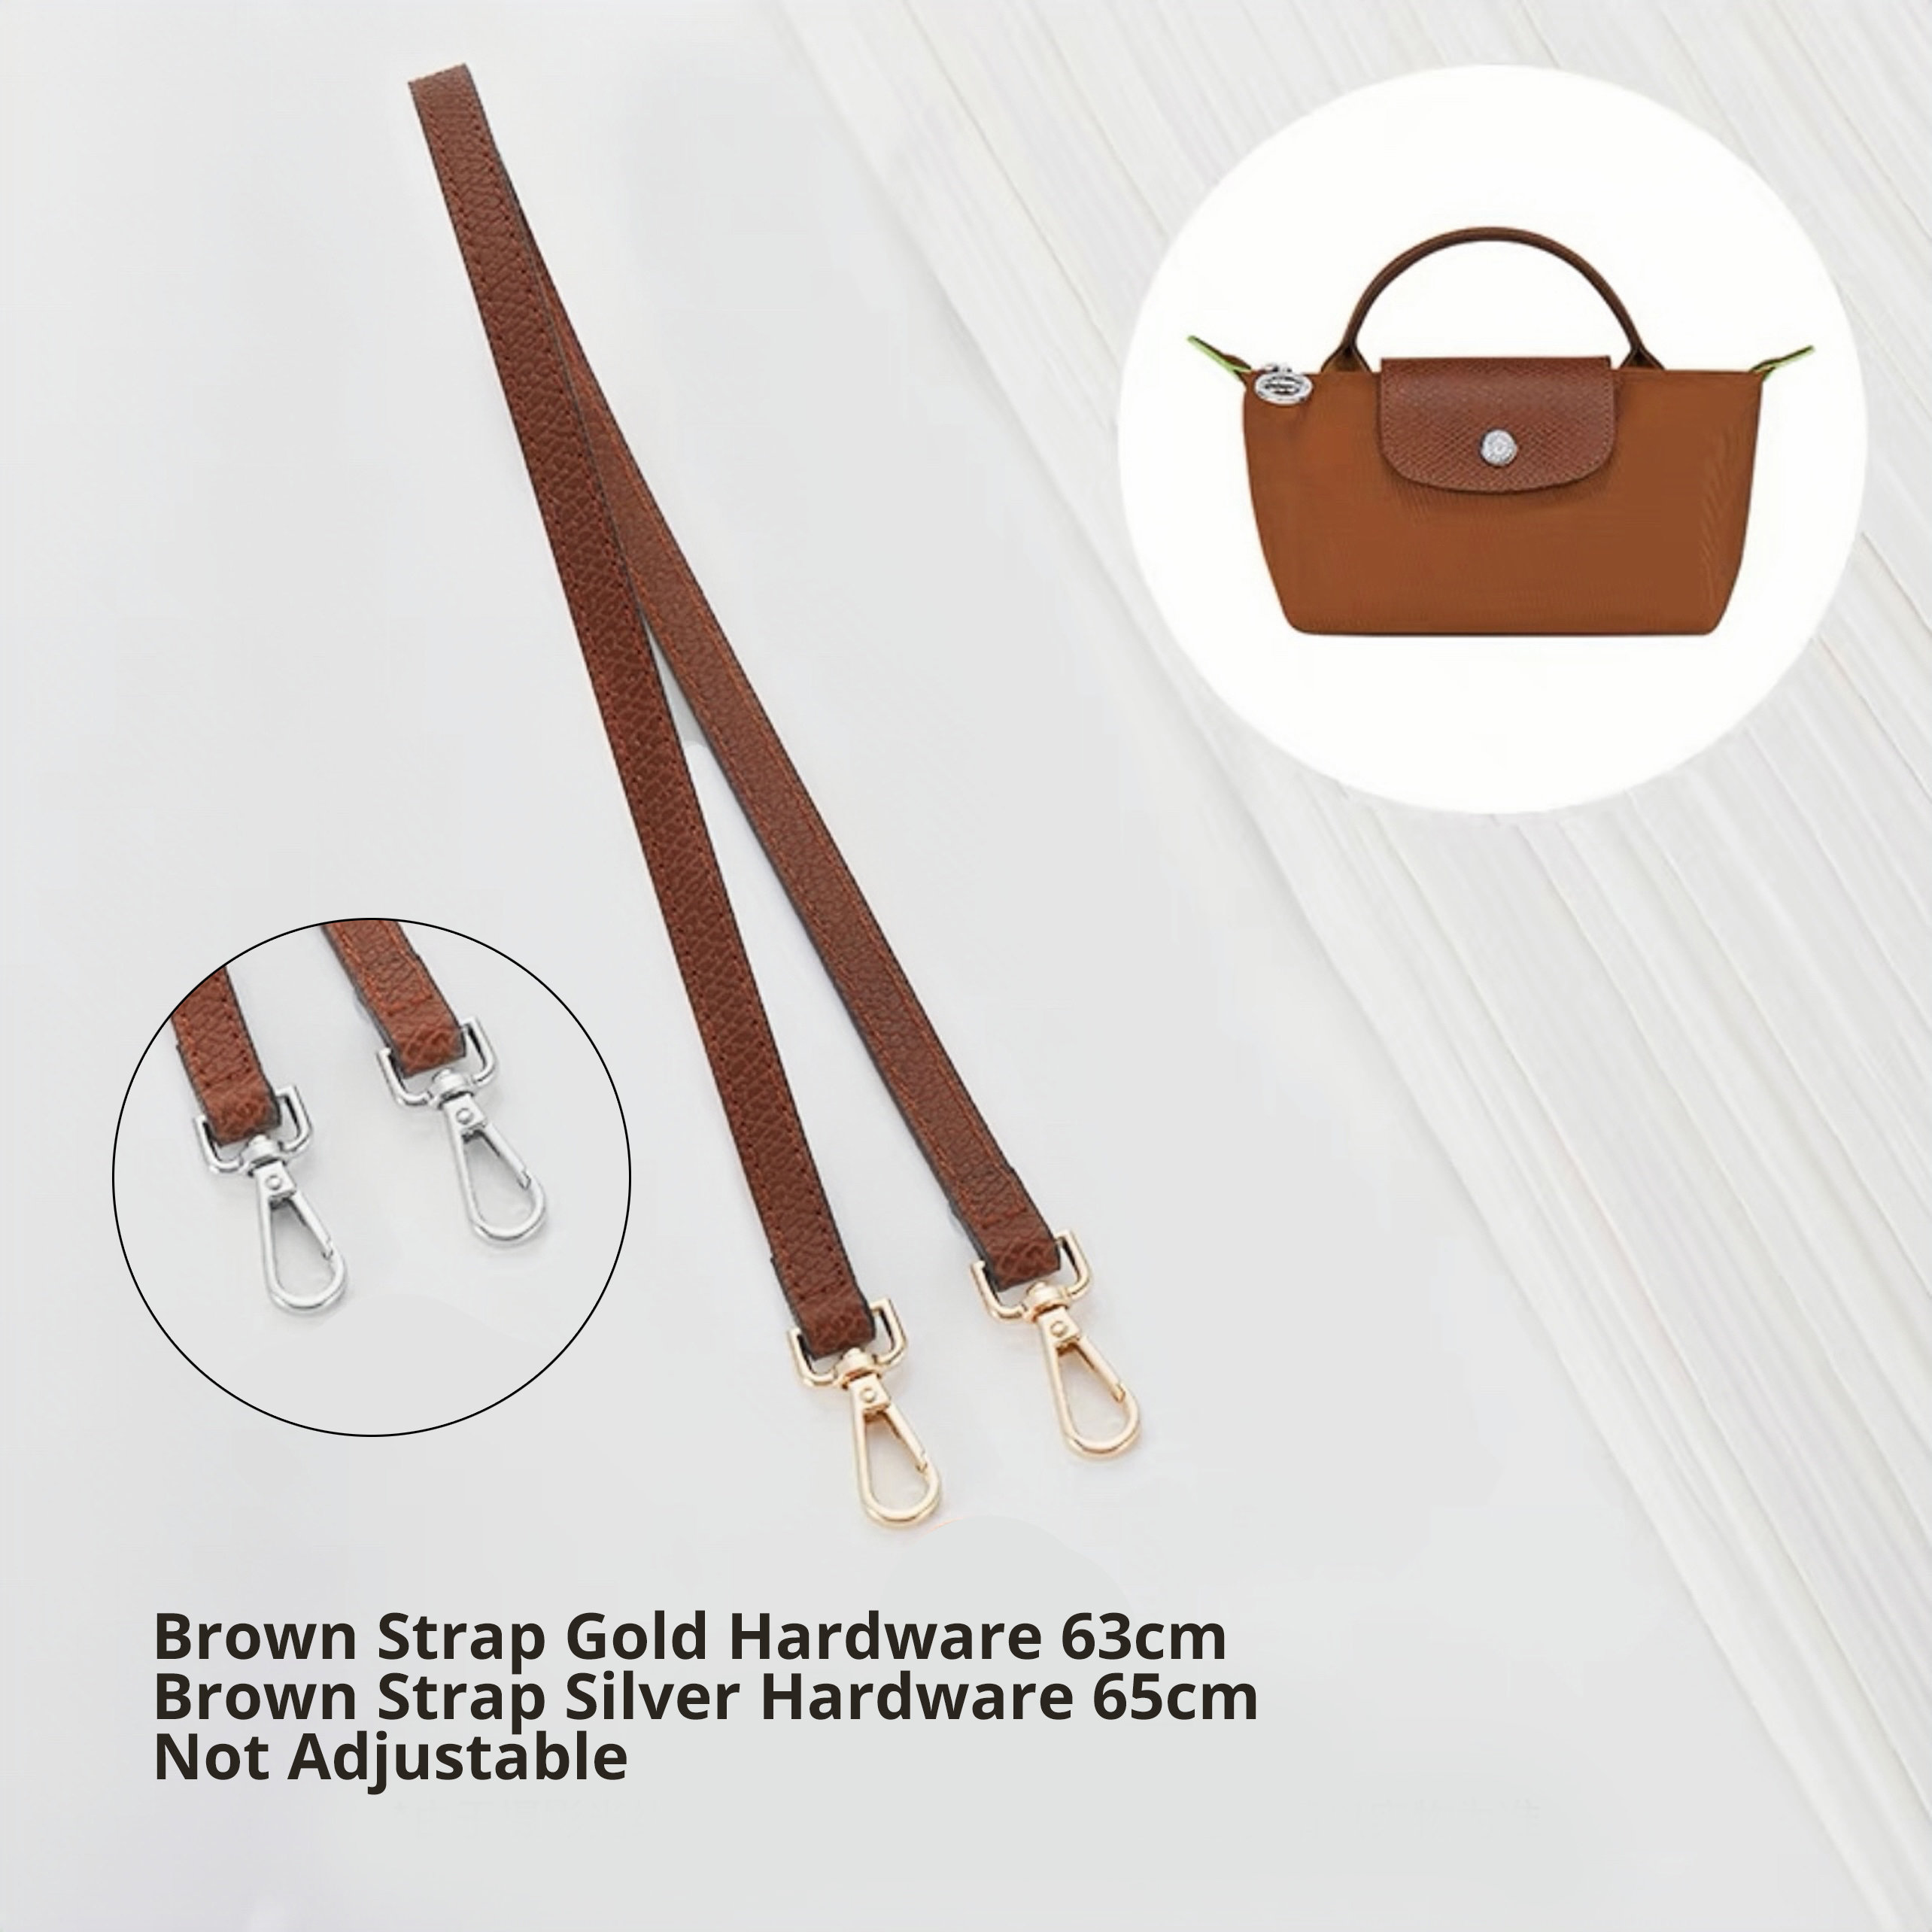 Adjustable Vachetta Leather Straps and Shoulder Straps for Bags 